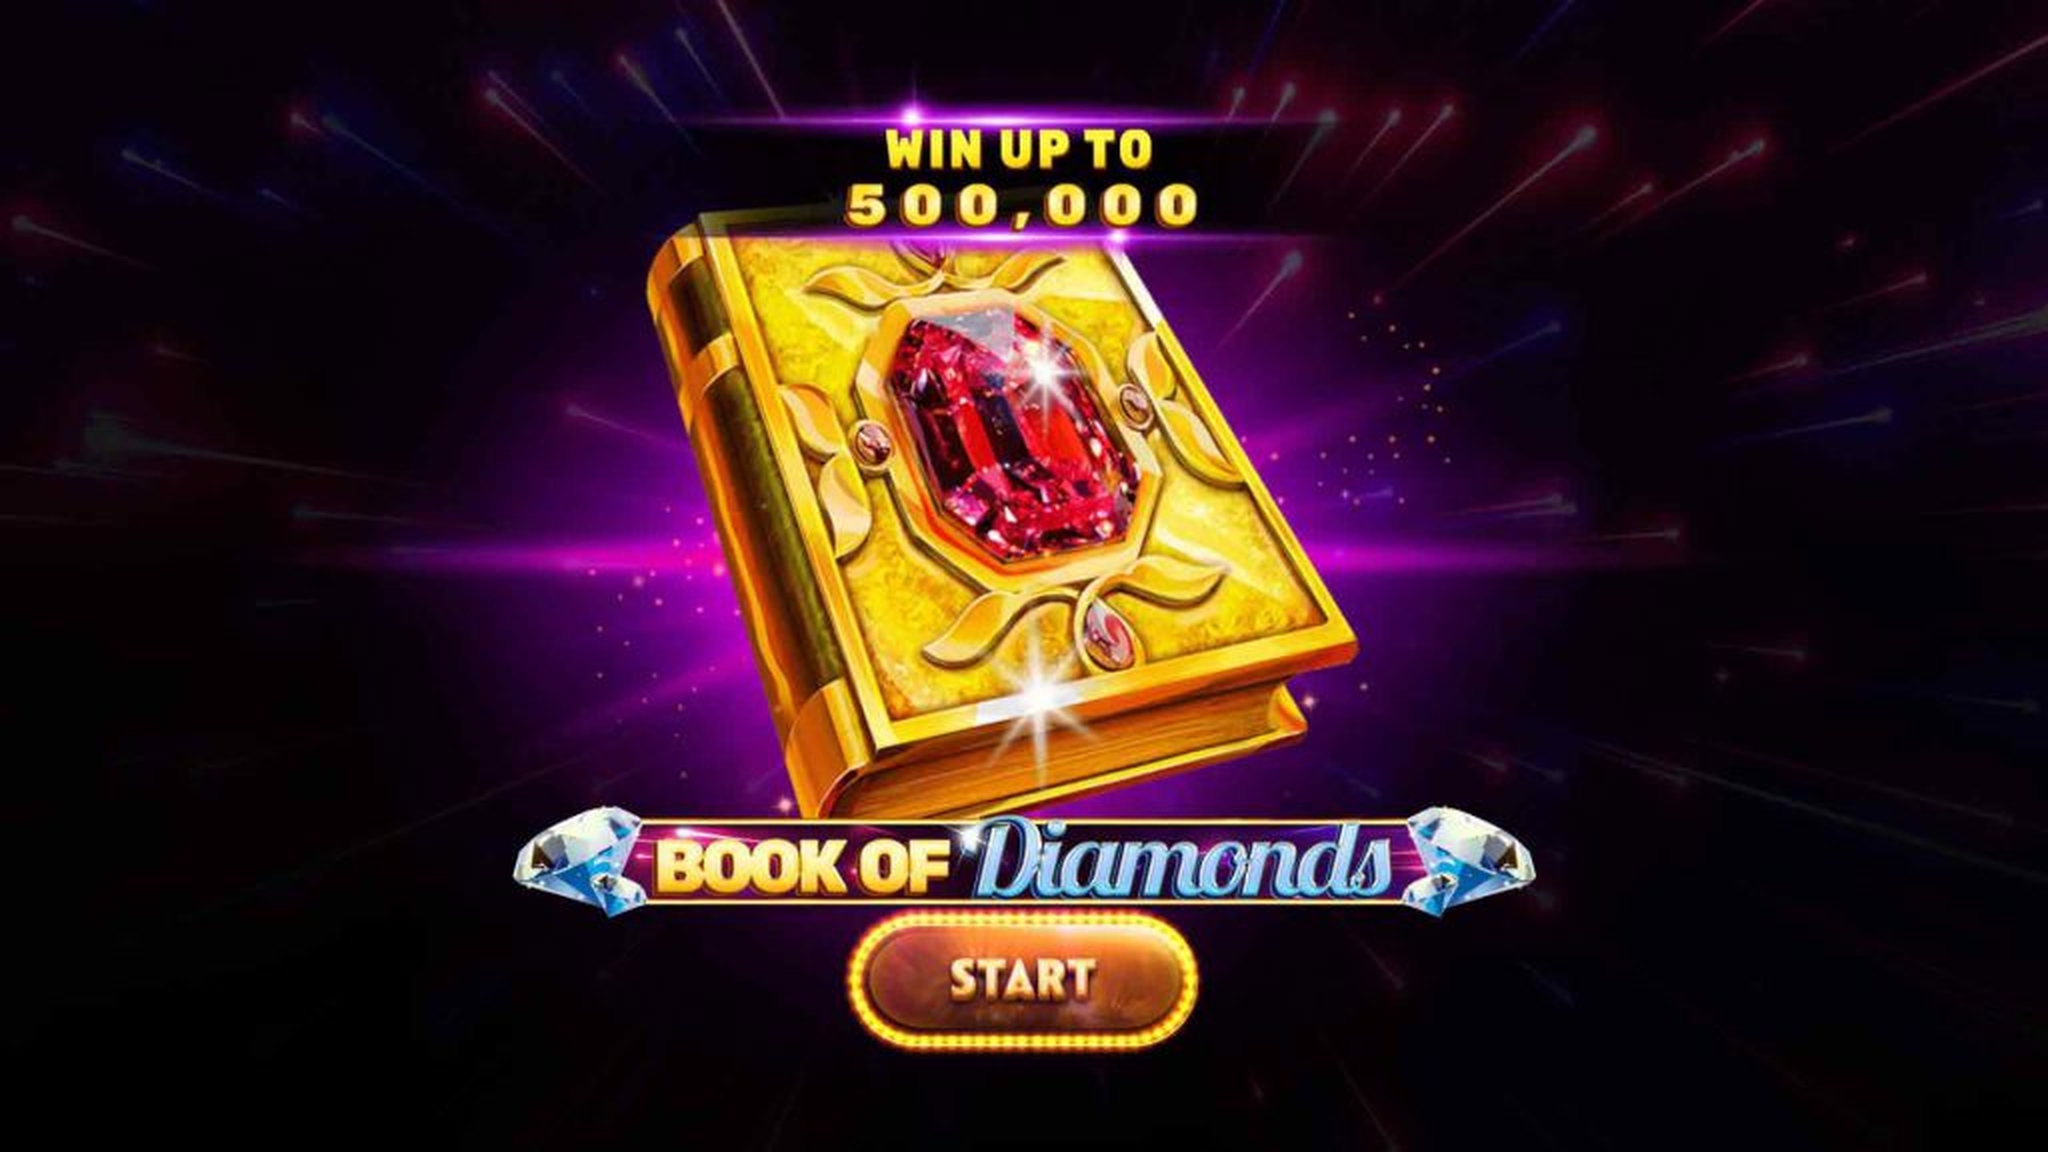 The Book of Diamonds Online Slot Demo Game by Spinomenal